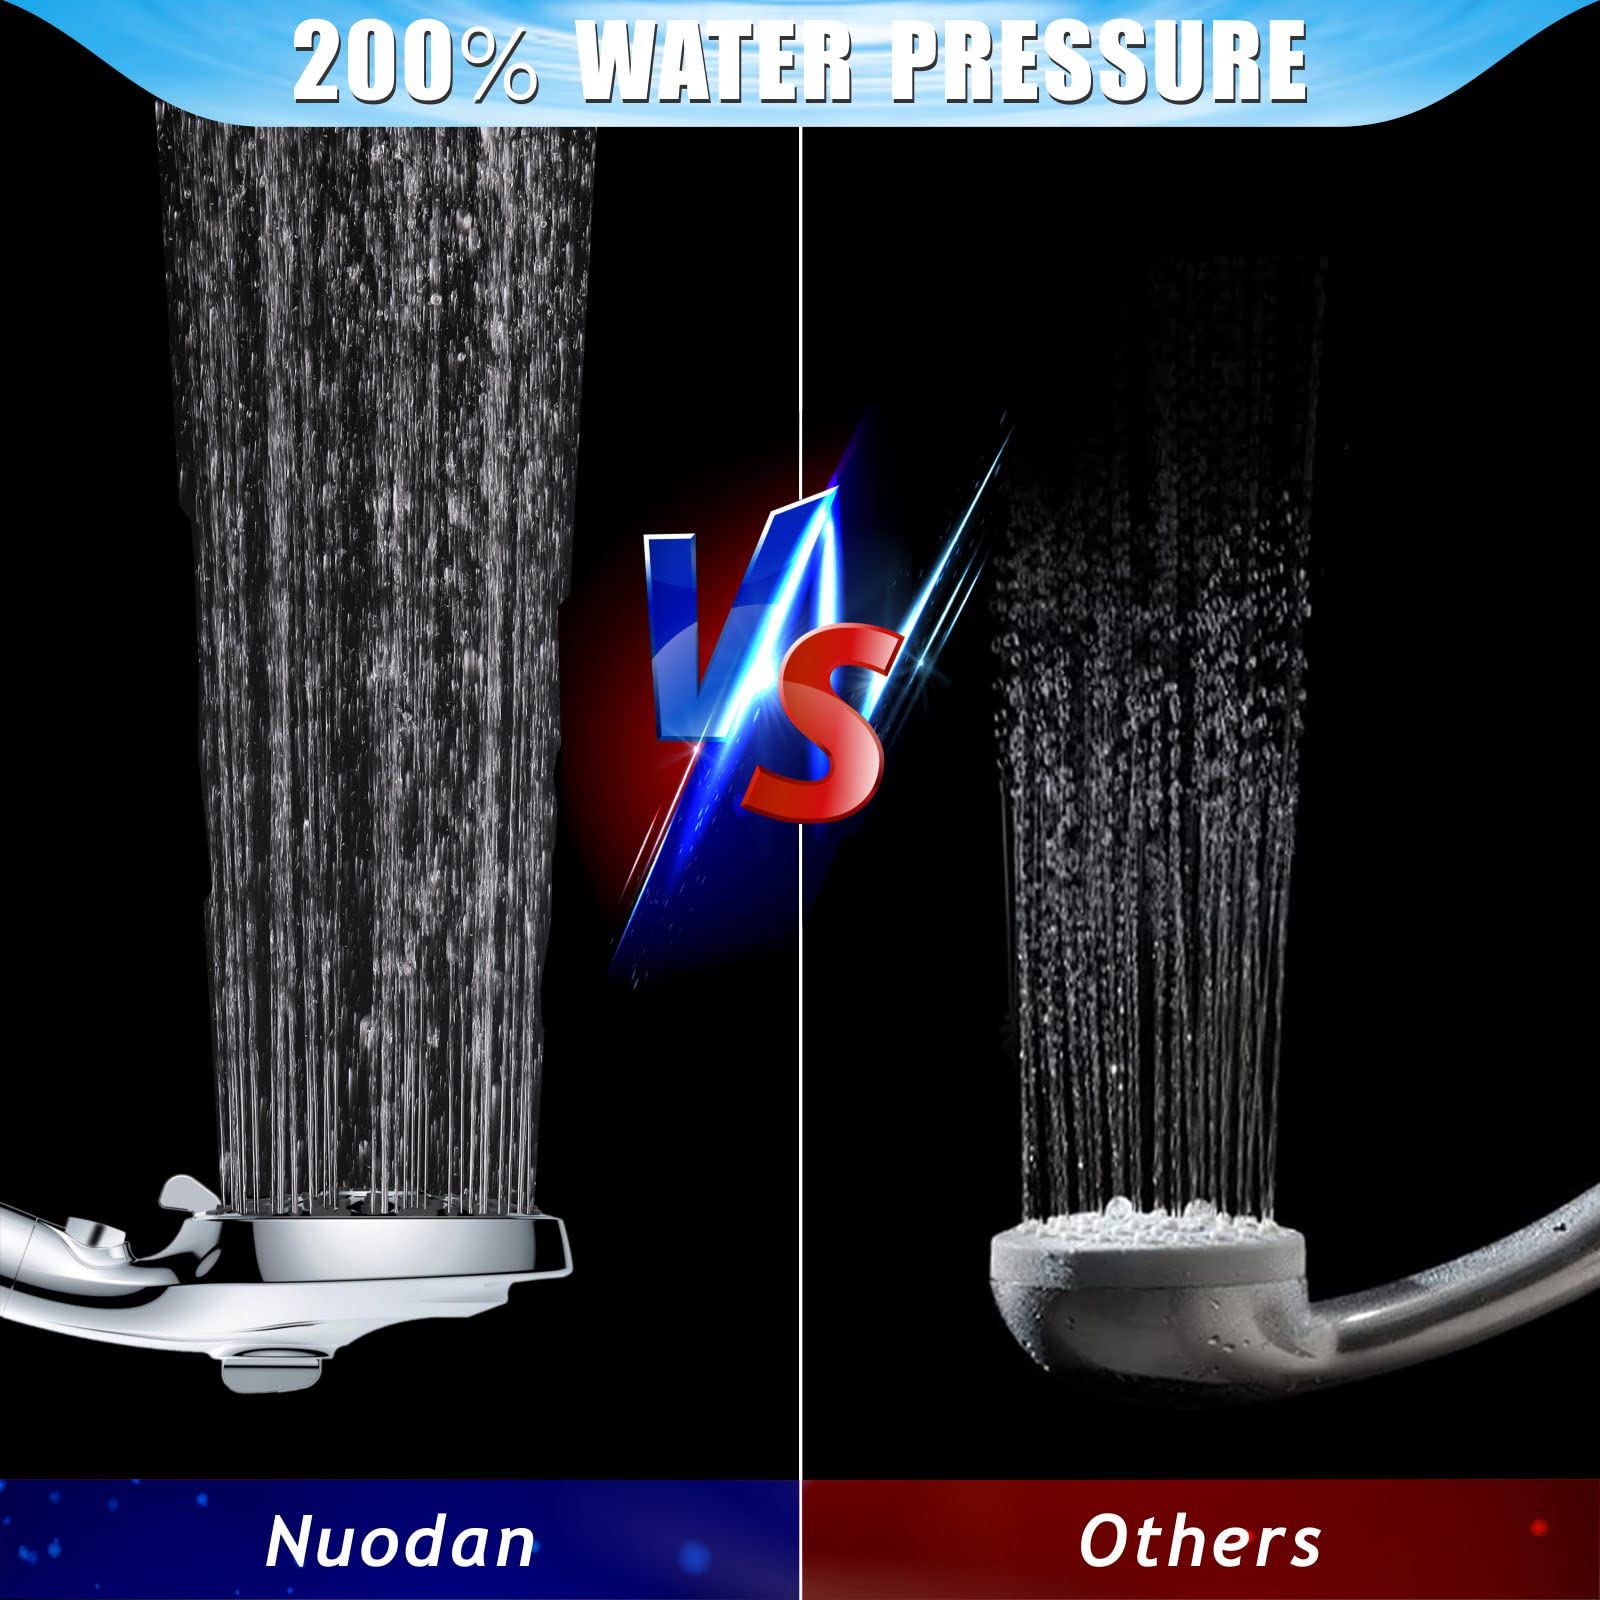 Nuodan Handheld Filtered Shower Head with ON/OFF Pause Switch - High Pressure 10-modes, Built-in Power Wash to Clean Bathroom Tub, Tile or Pets, Stainless Steel Hose, Wall and Overhead Brackets